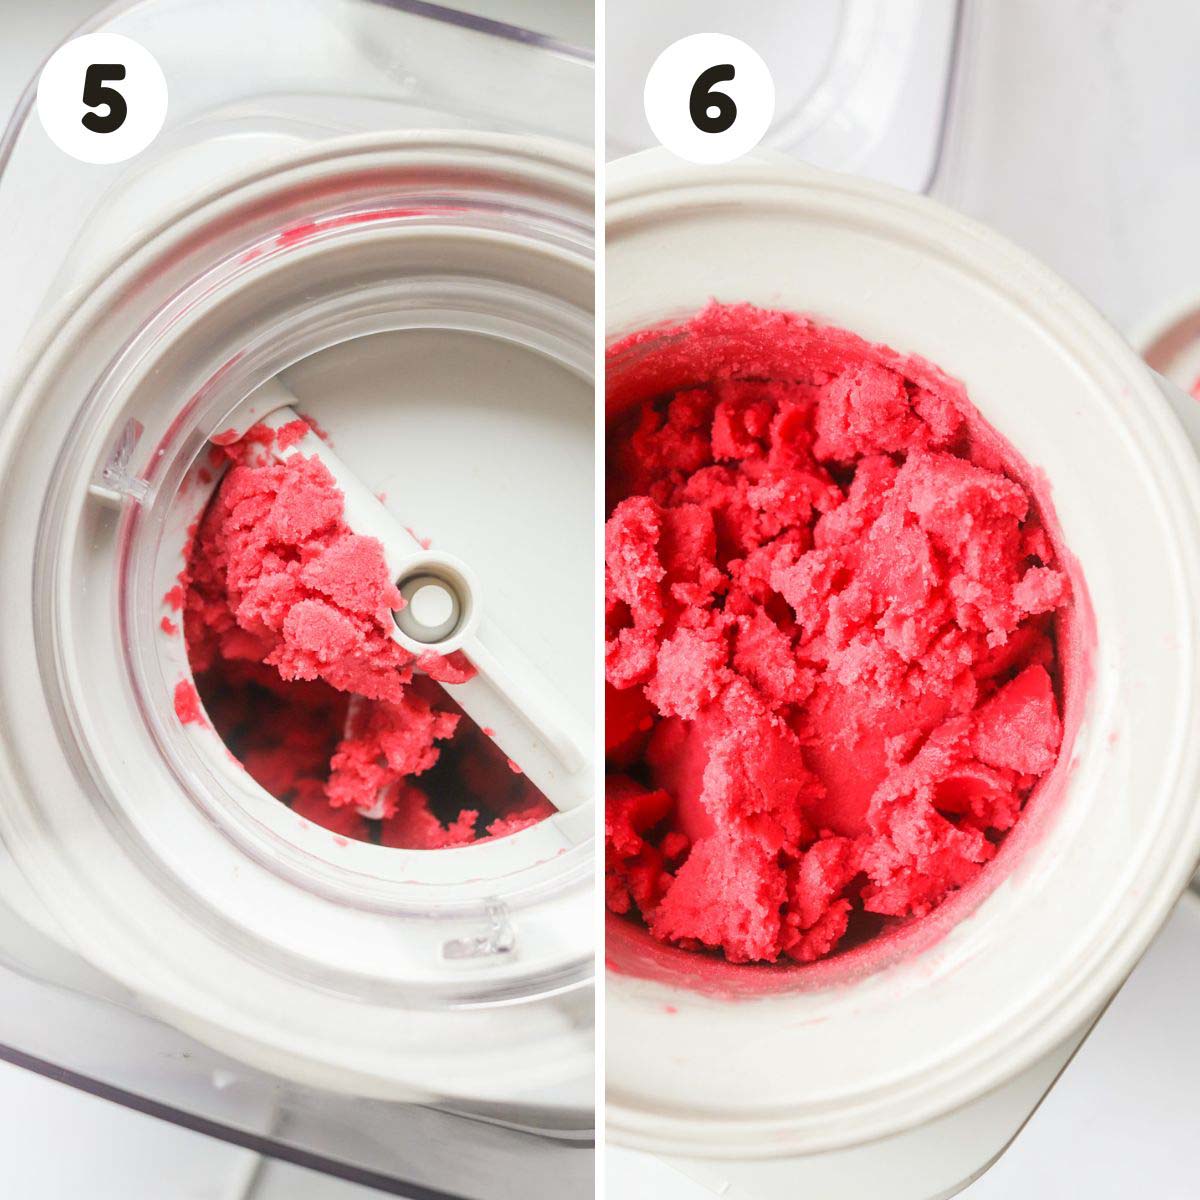 Steps to make the raspberry sorbet in the ice cream maker.